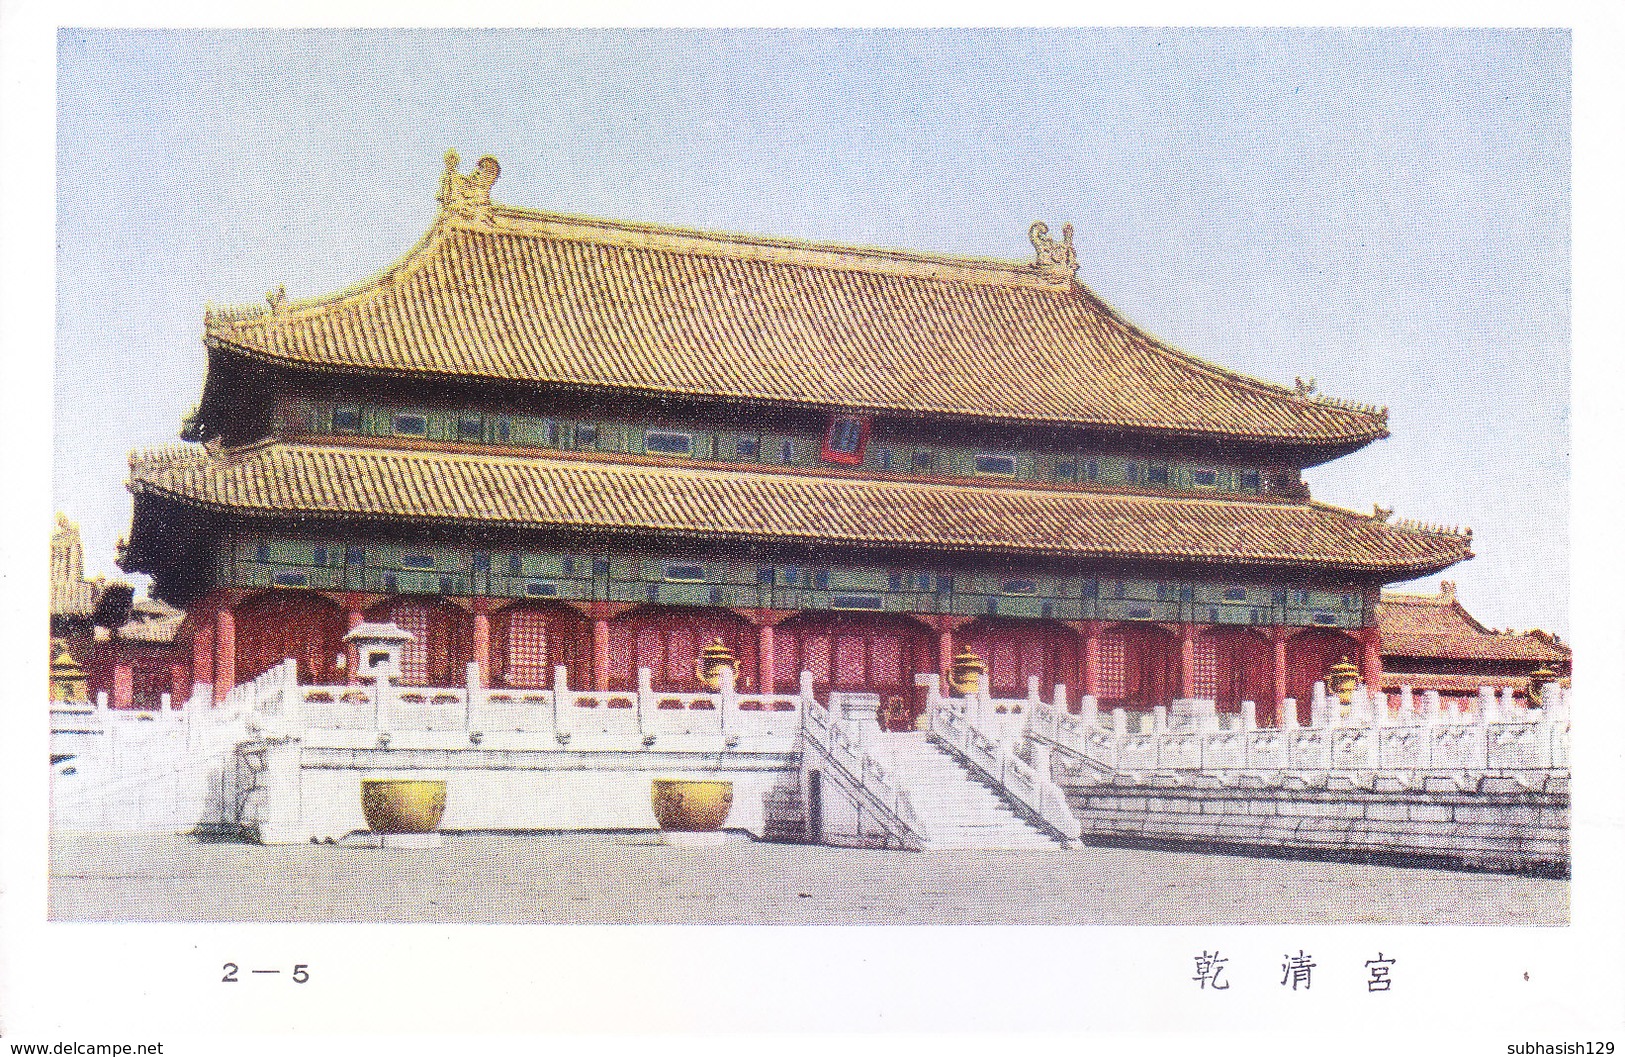 CHINA : COLOUR PICTURE POST CARD : THE IMPERIAL PALACE : TOURISM & ARCHITECTURE : CHIEN CHING KUNG - PALACE OF BRIGHTNES - China